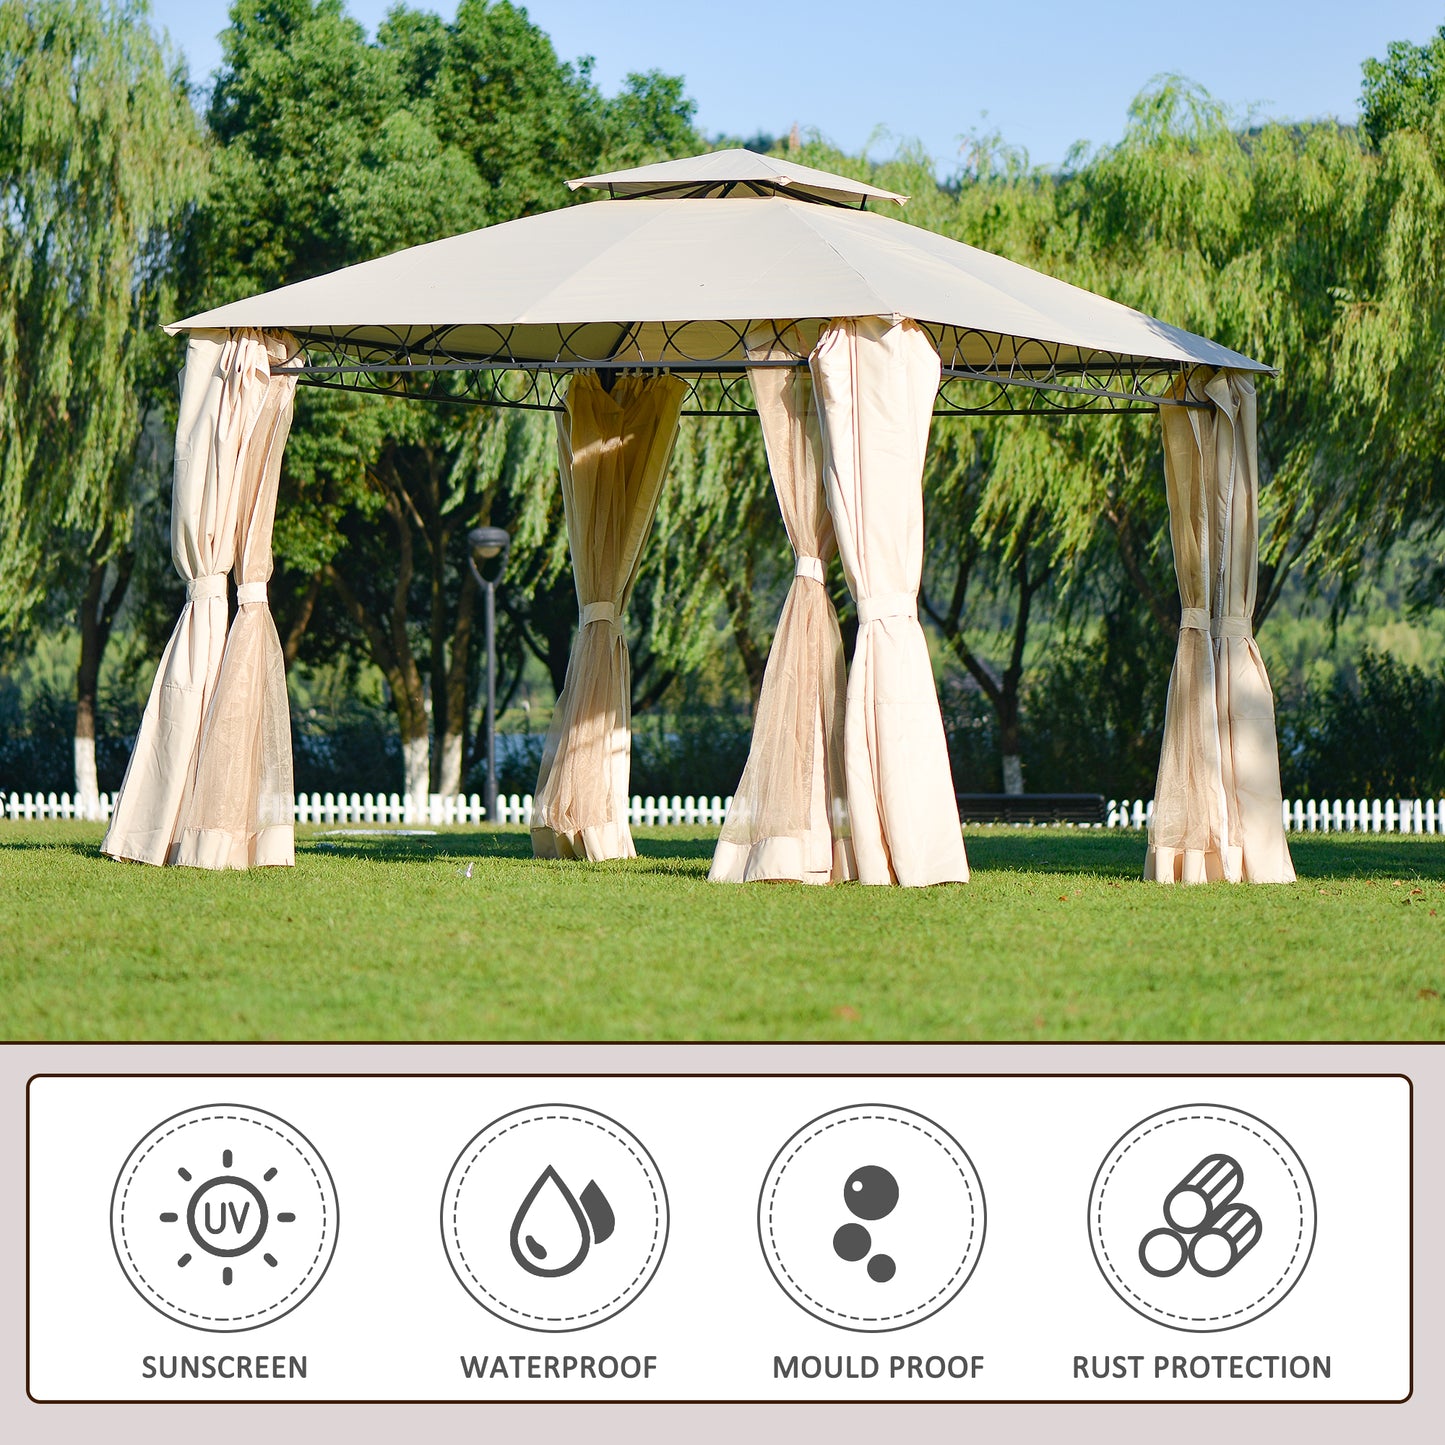 10.5 x 10.5 ft Gazebo for Patios, SYNGAR Outdoor Canopy for Shade and Rain, Waterproof Gazebo Tent with Double Roof and Mosquito Netting, for Poolside, Lawn, Garden, Backyard, Deck, Beige, C13